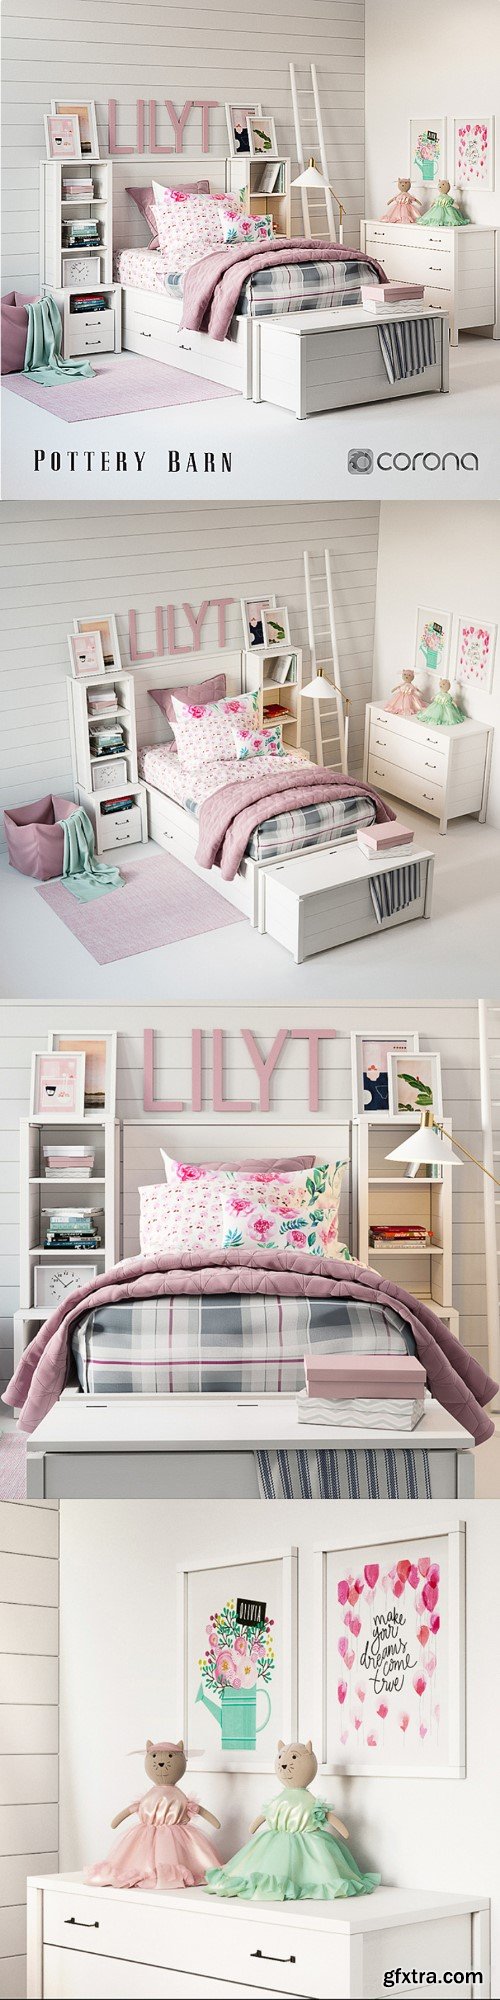 Set for baby Girl Plaid bedroom